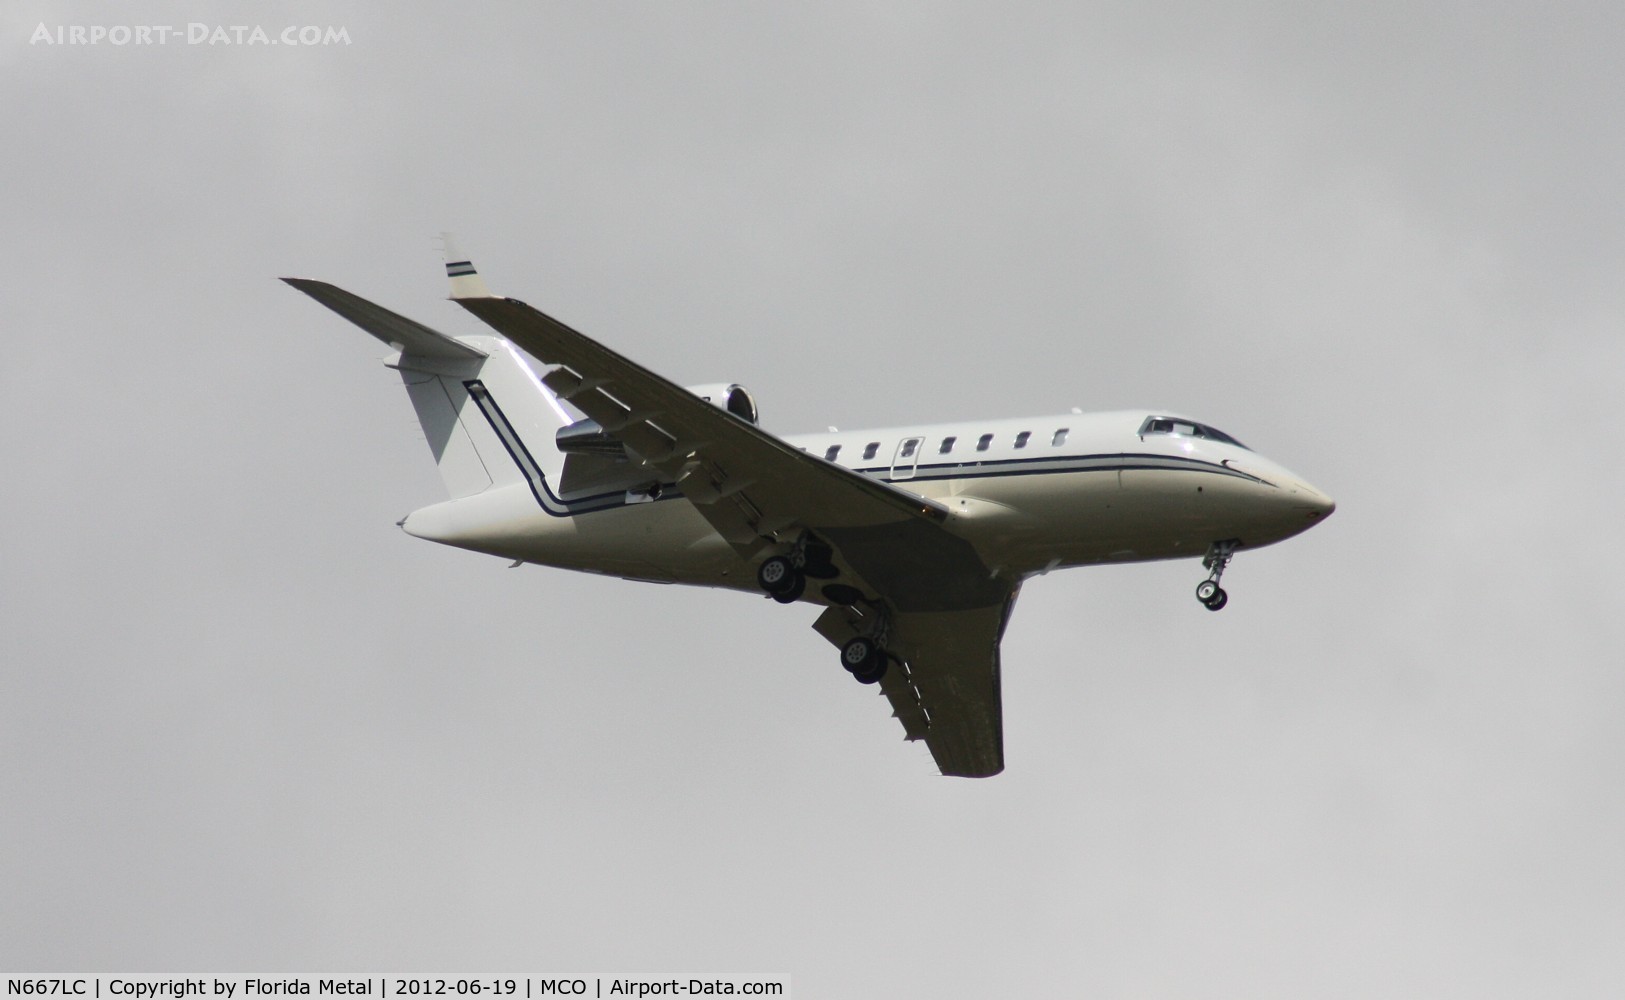 N667LC, 2007 Bombardier Challenger 604 (CL-600-2B16) C/N 5740, Challenger 601